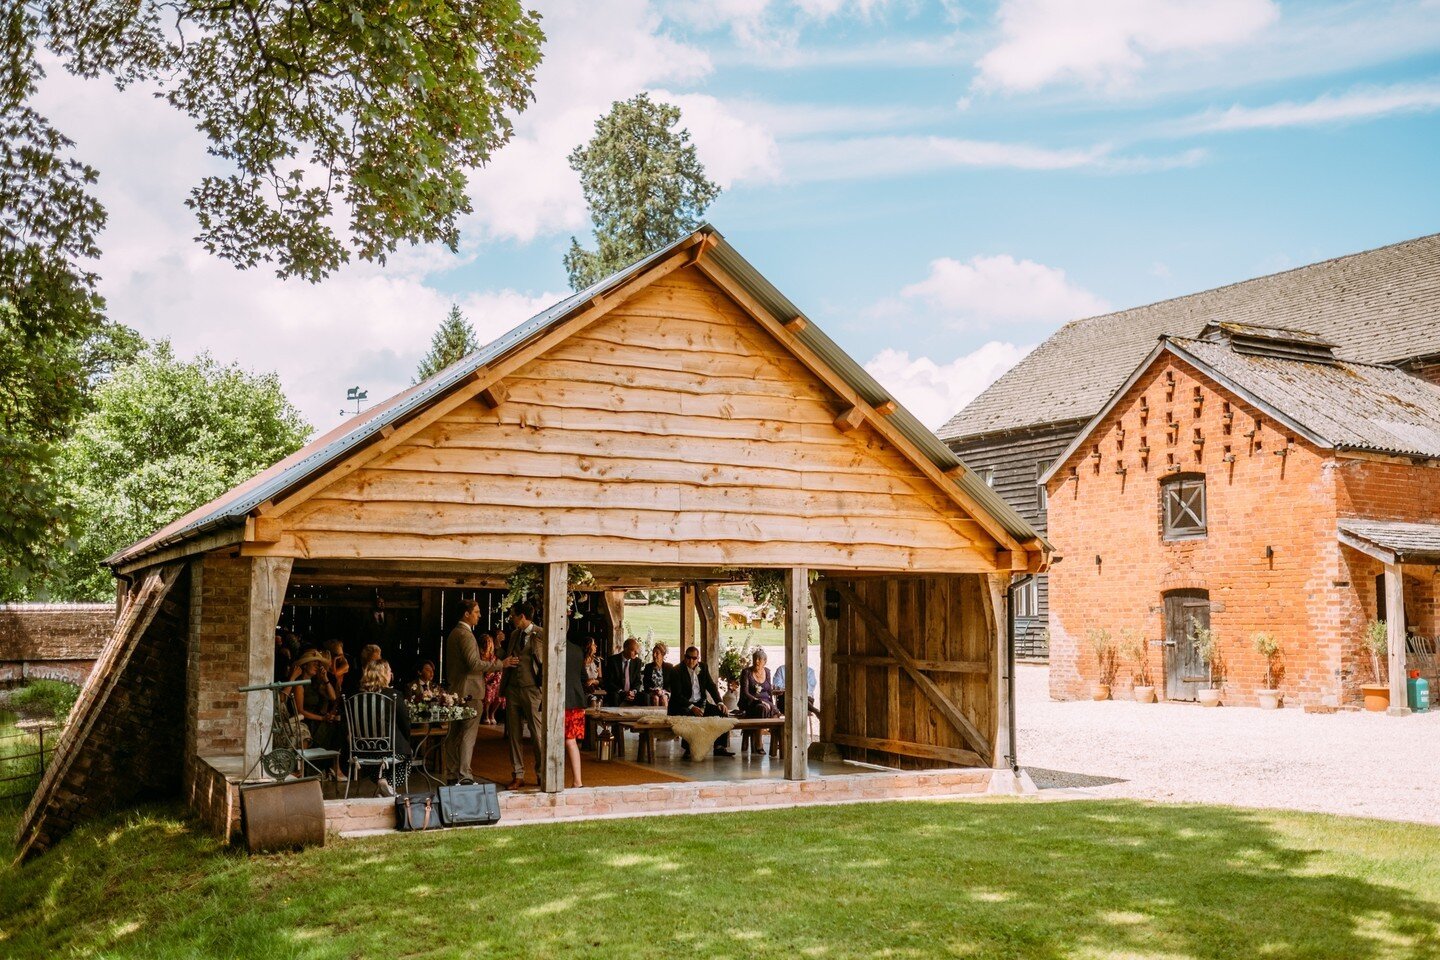 Here's one from @the_haybarn_hereford - such a great location for a ceremony. ⁠
⁠
As a photographer, it's always nice to be able to move from the front to the back during the ceremony without getting in the way!⁠
⁠
#weddingphotography #haybarnherefor